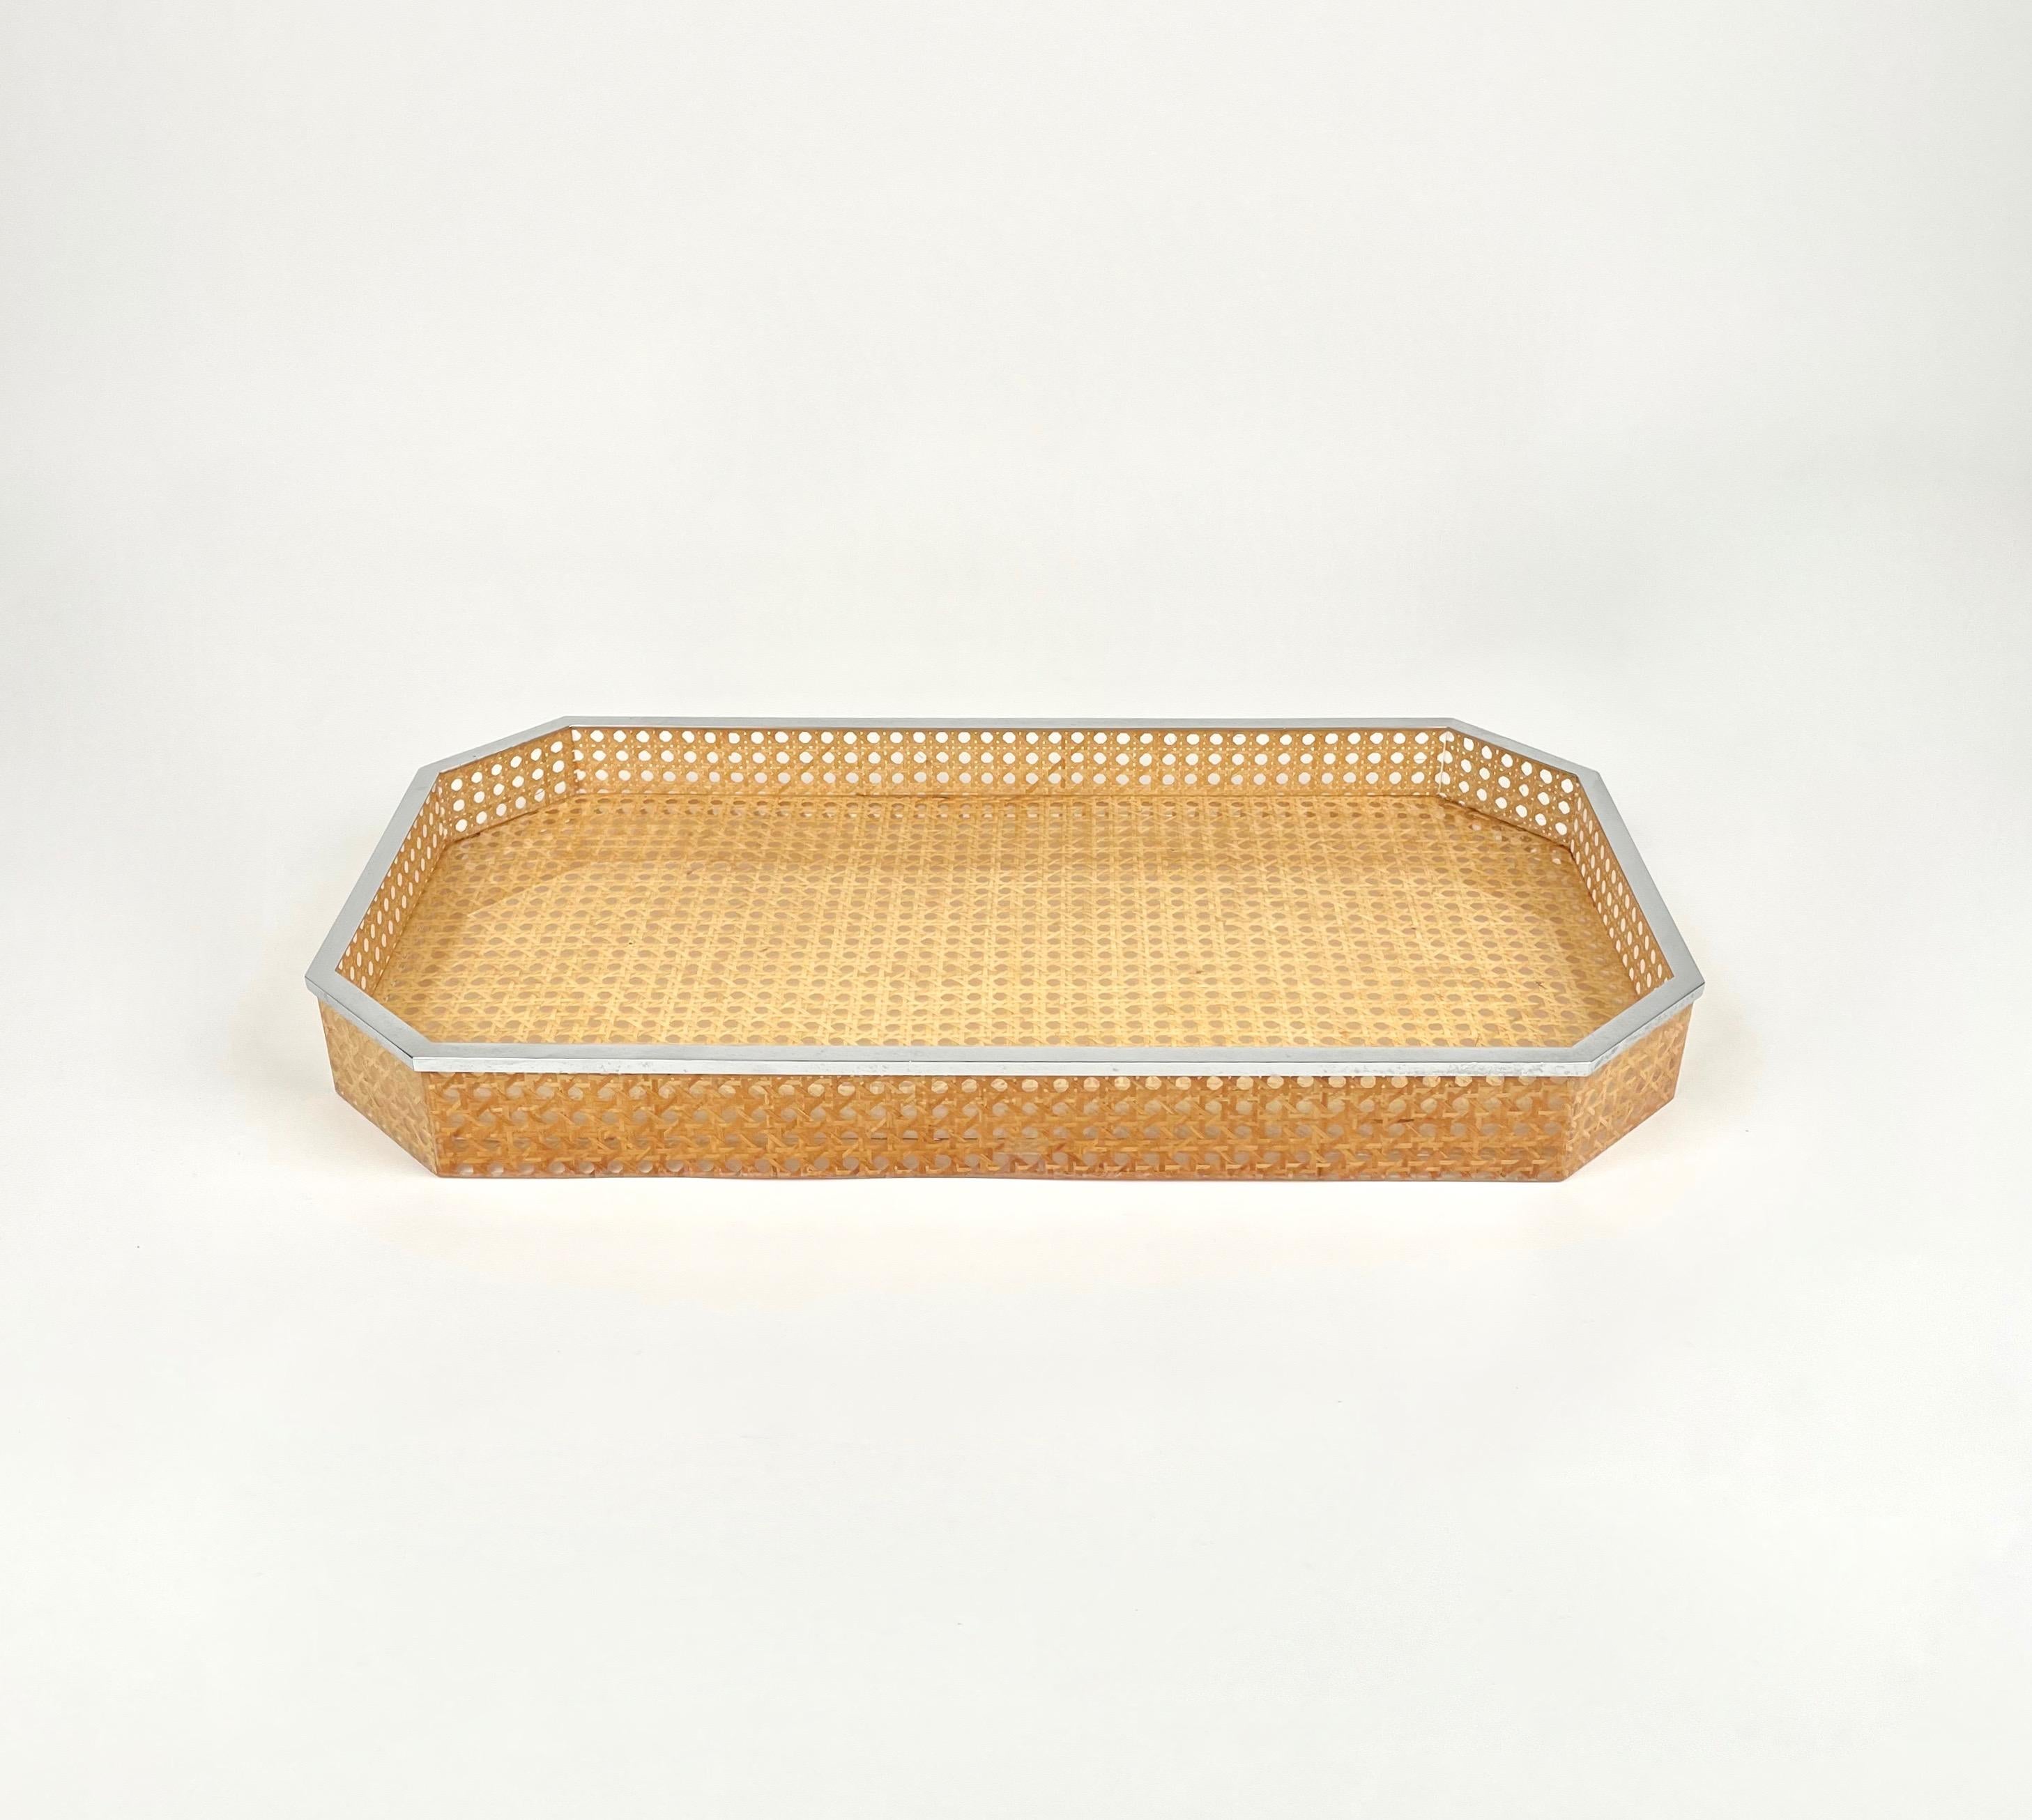 Late 20th Century Centerpiece Tray Lucite, Rattan & Chrome Christian Dior Style, Italy, 1970s